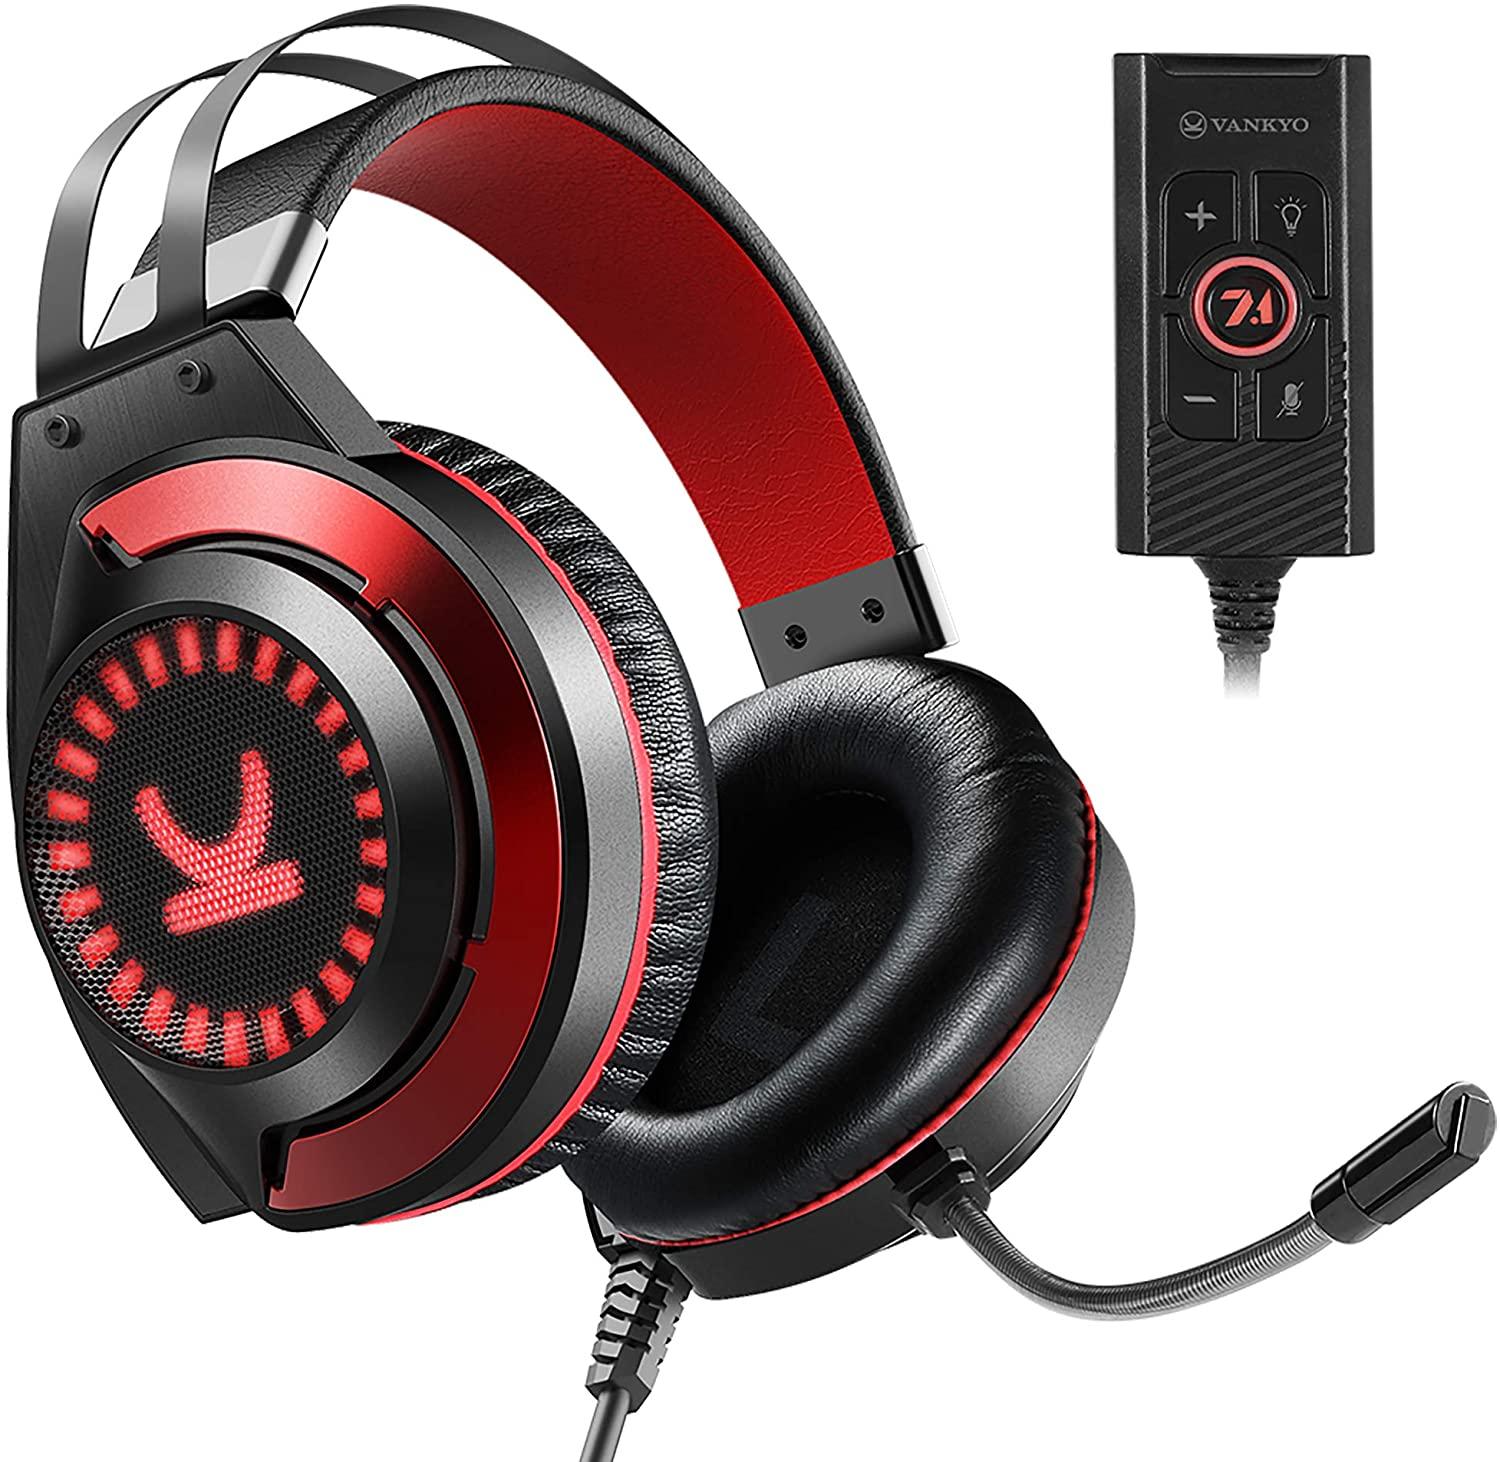 Vankyo CM7000 7.1 Surround Sound Gaming Headset for $11.99 Shipped